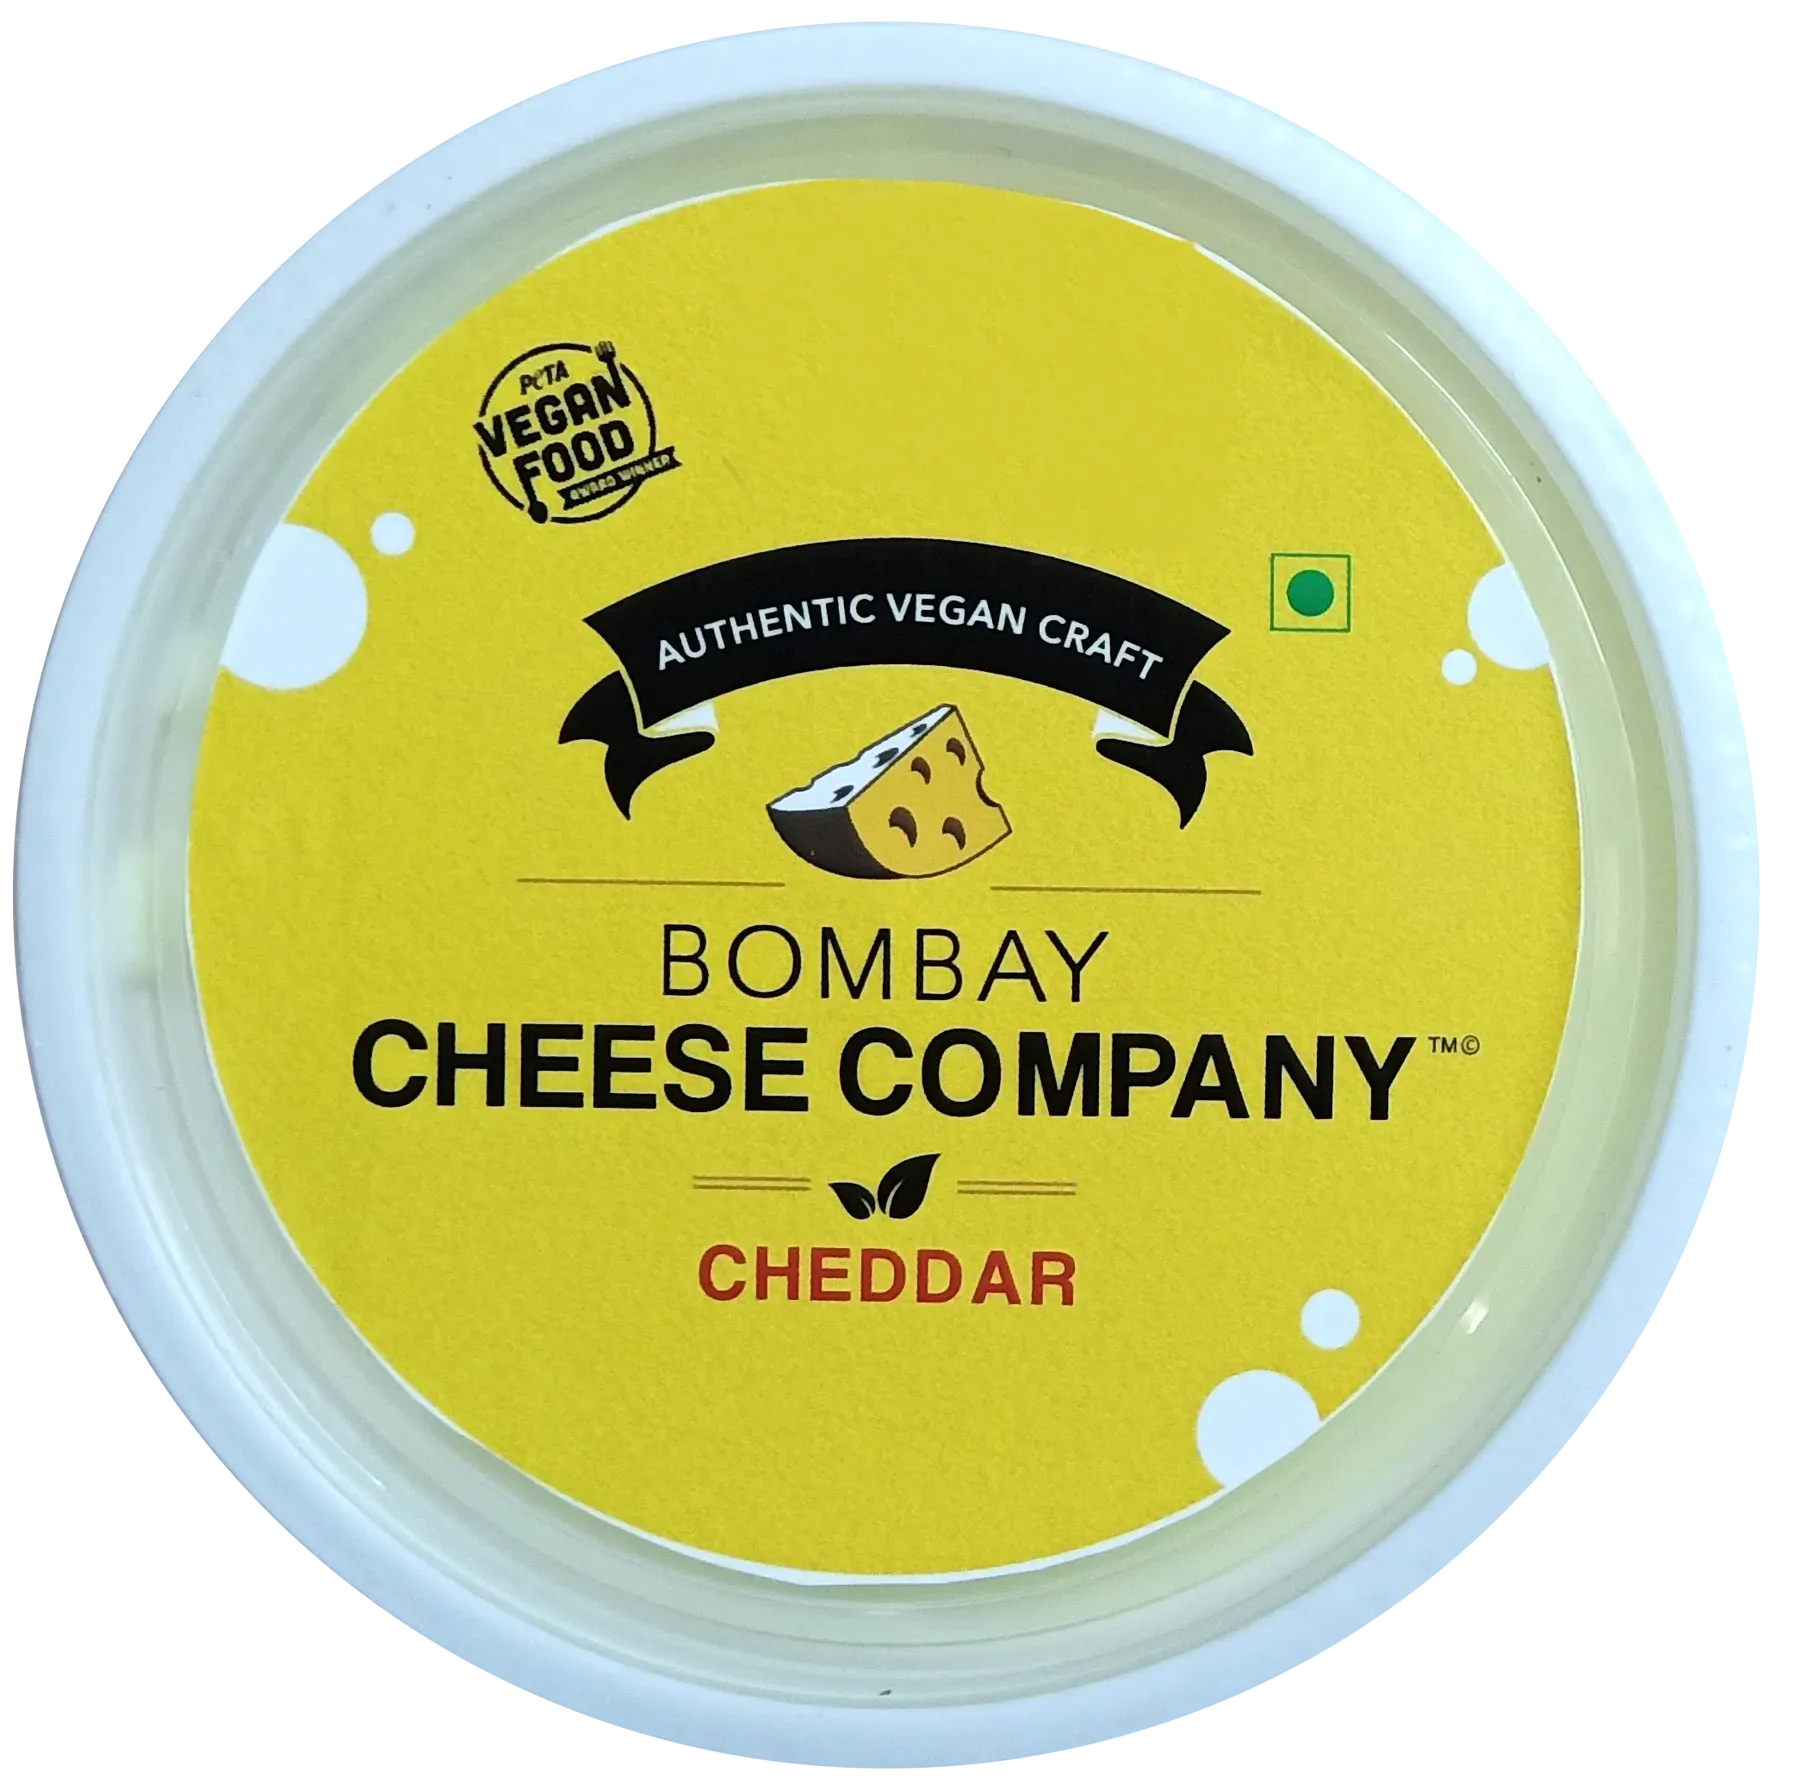 Bombay Cheese Company's Cheddar Cheese Image